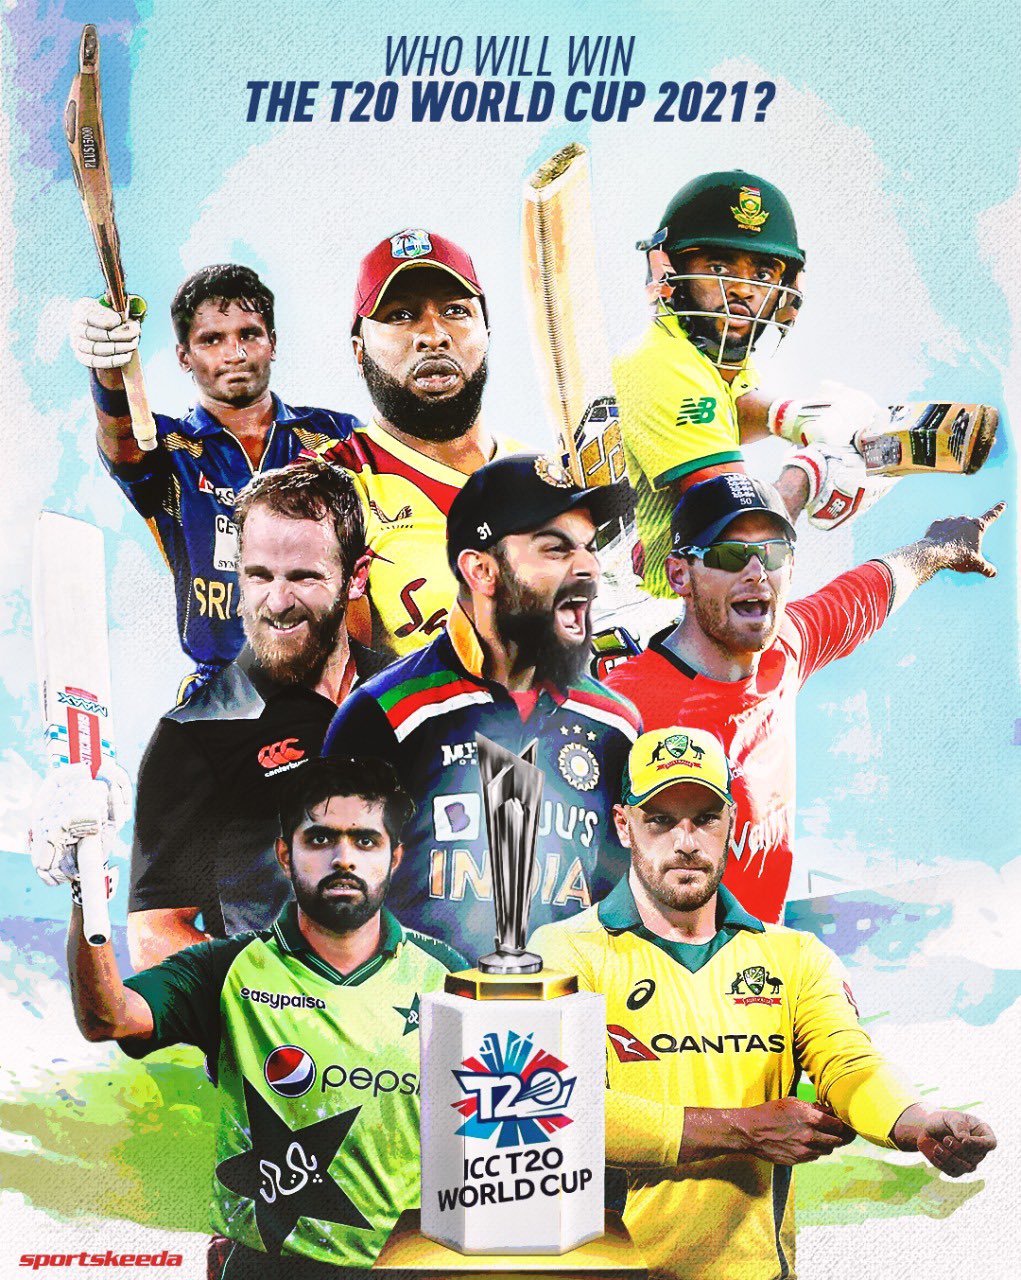 Sportskeeda India on Twitter: &quot;Who do you think will win it? 🤔🏆 #T20WorldCup https://t.co/X3MmbmxJqw&quot; / Twitter